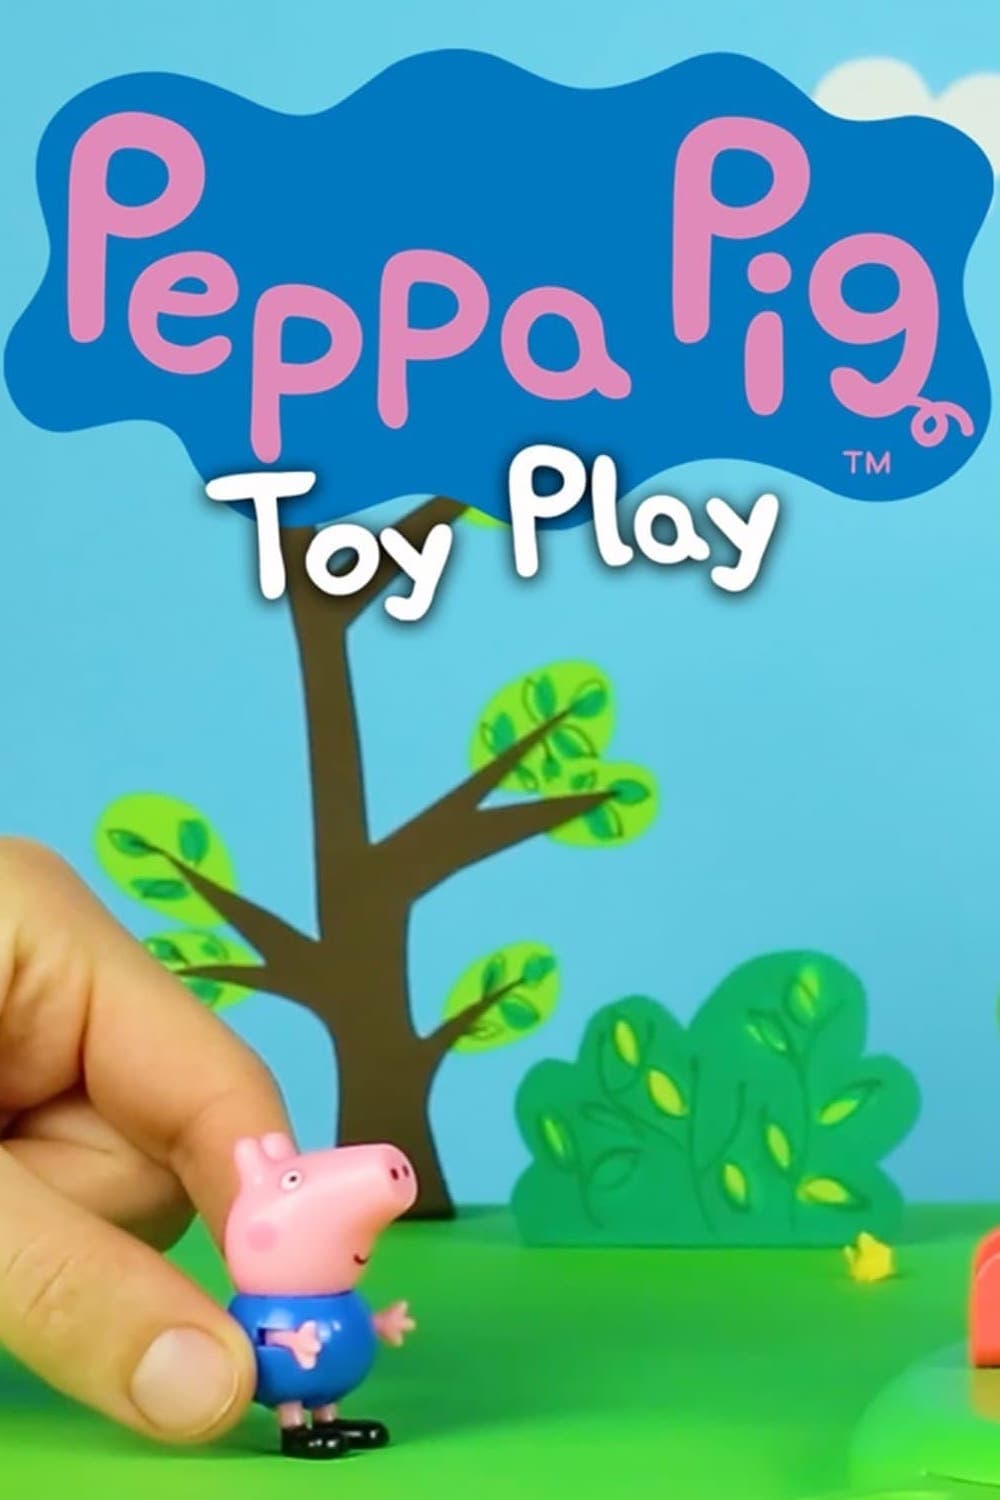 Peppa Pig - Toy Play TV Shows About Kids